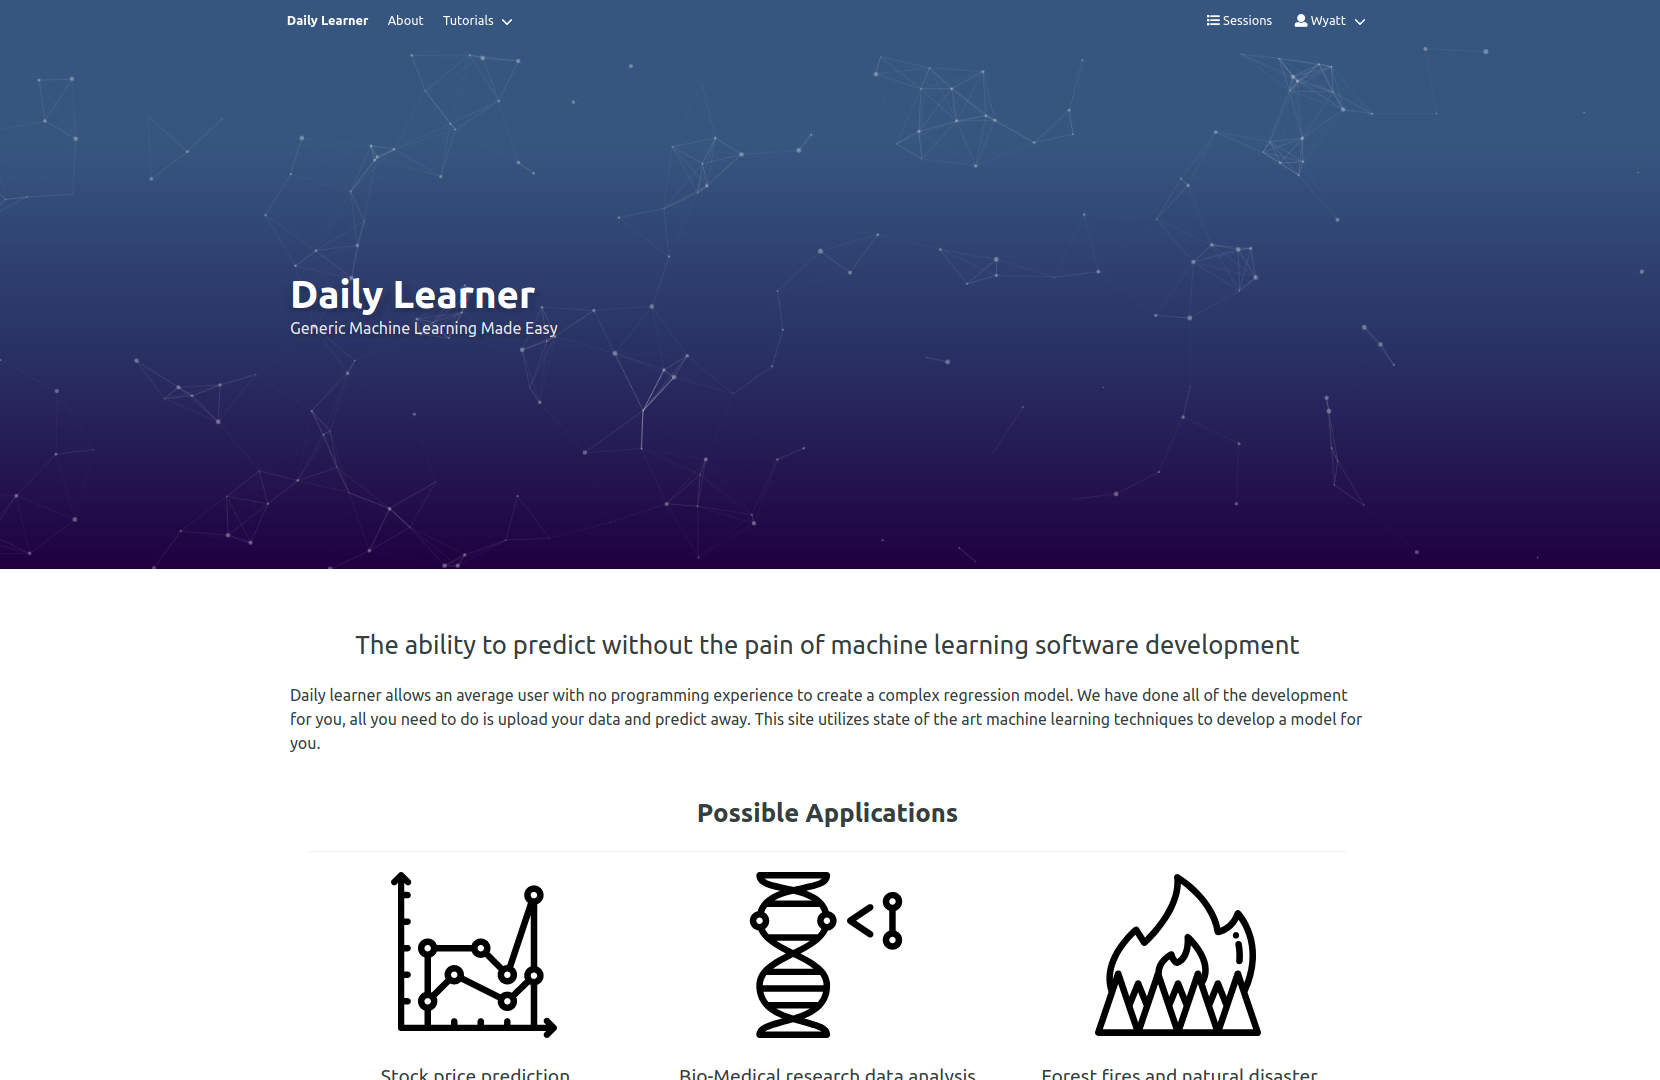 Image of Daily Learner